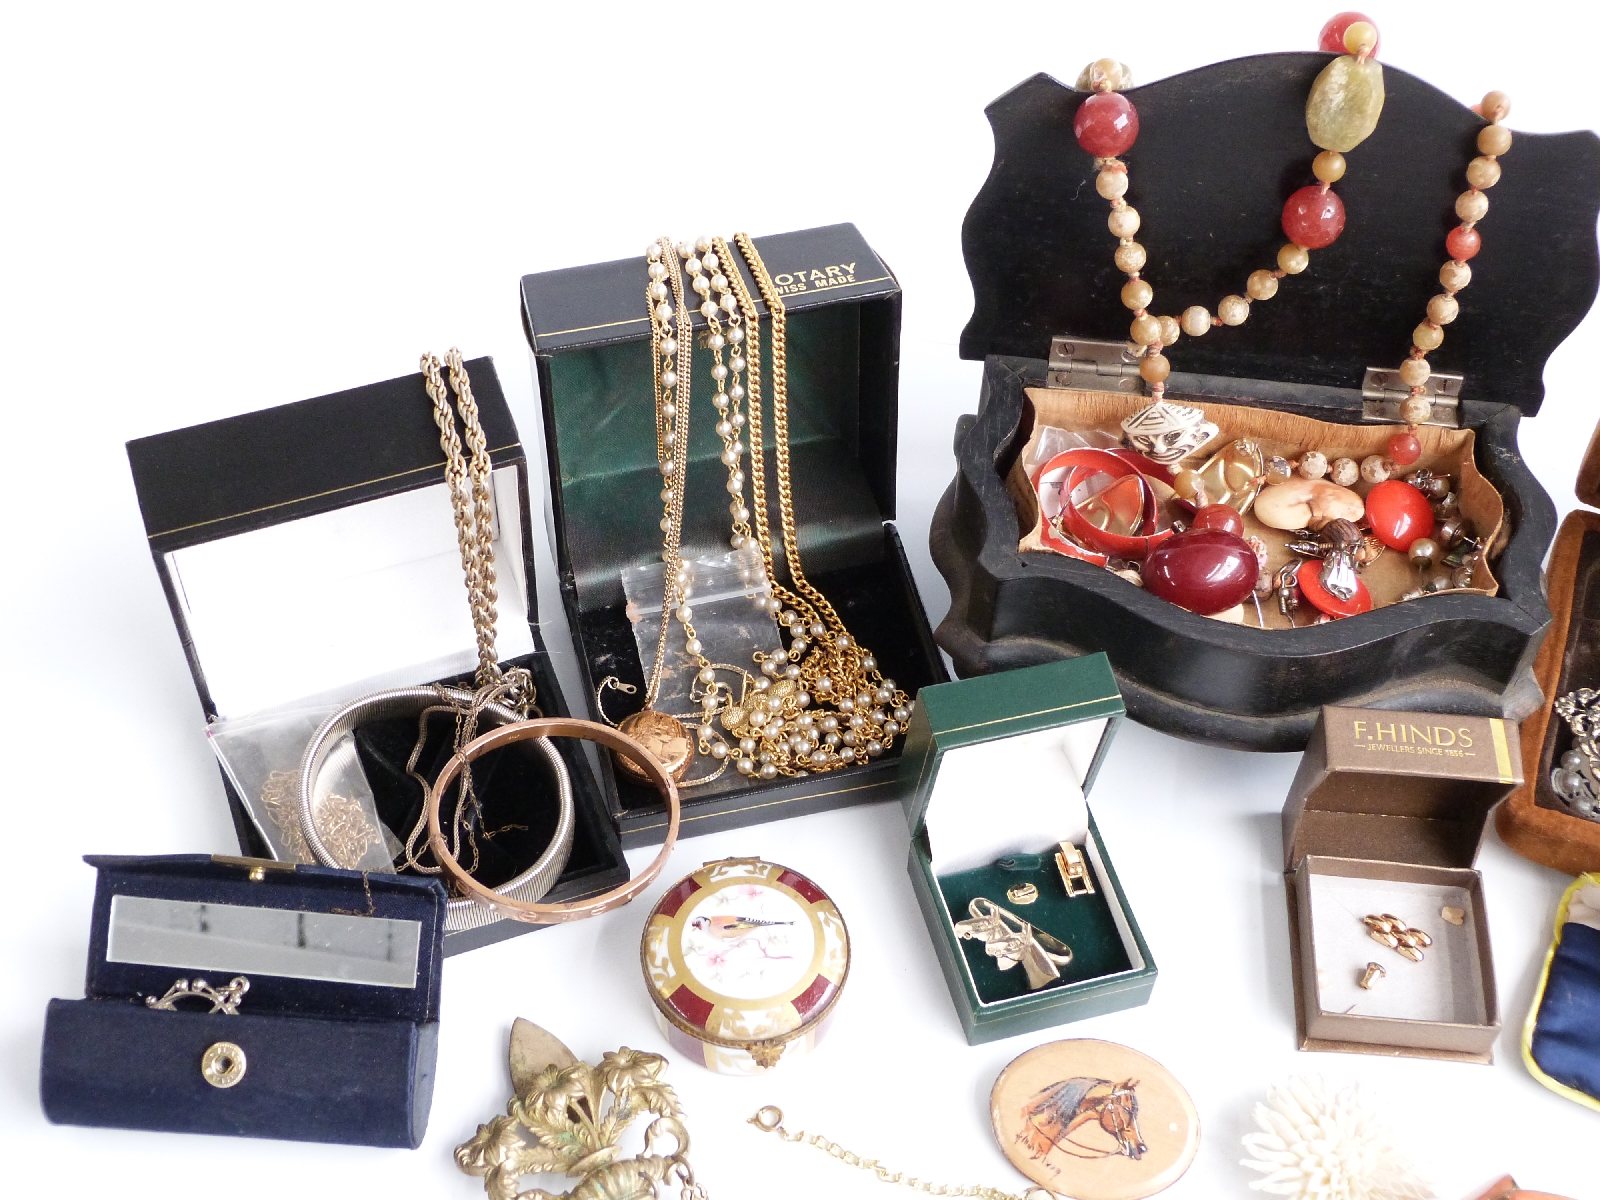 A collection of costume jewellery including brooches, beads, earrings, chatelaine, agate necklace, - Image 2 of 4